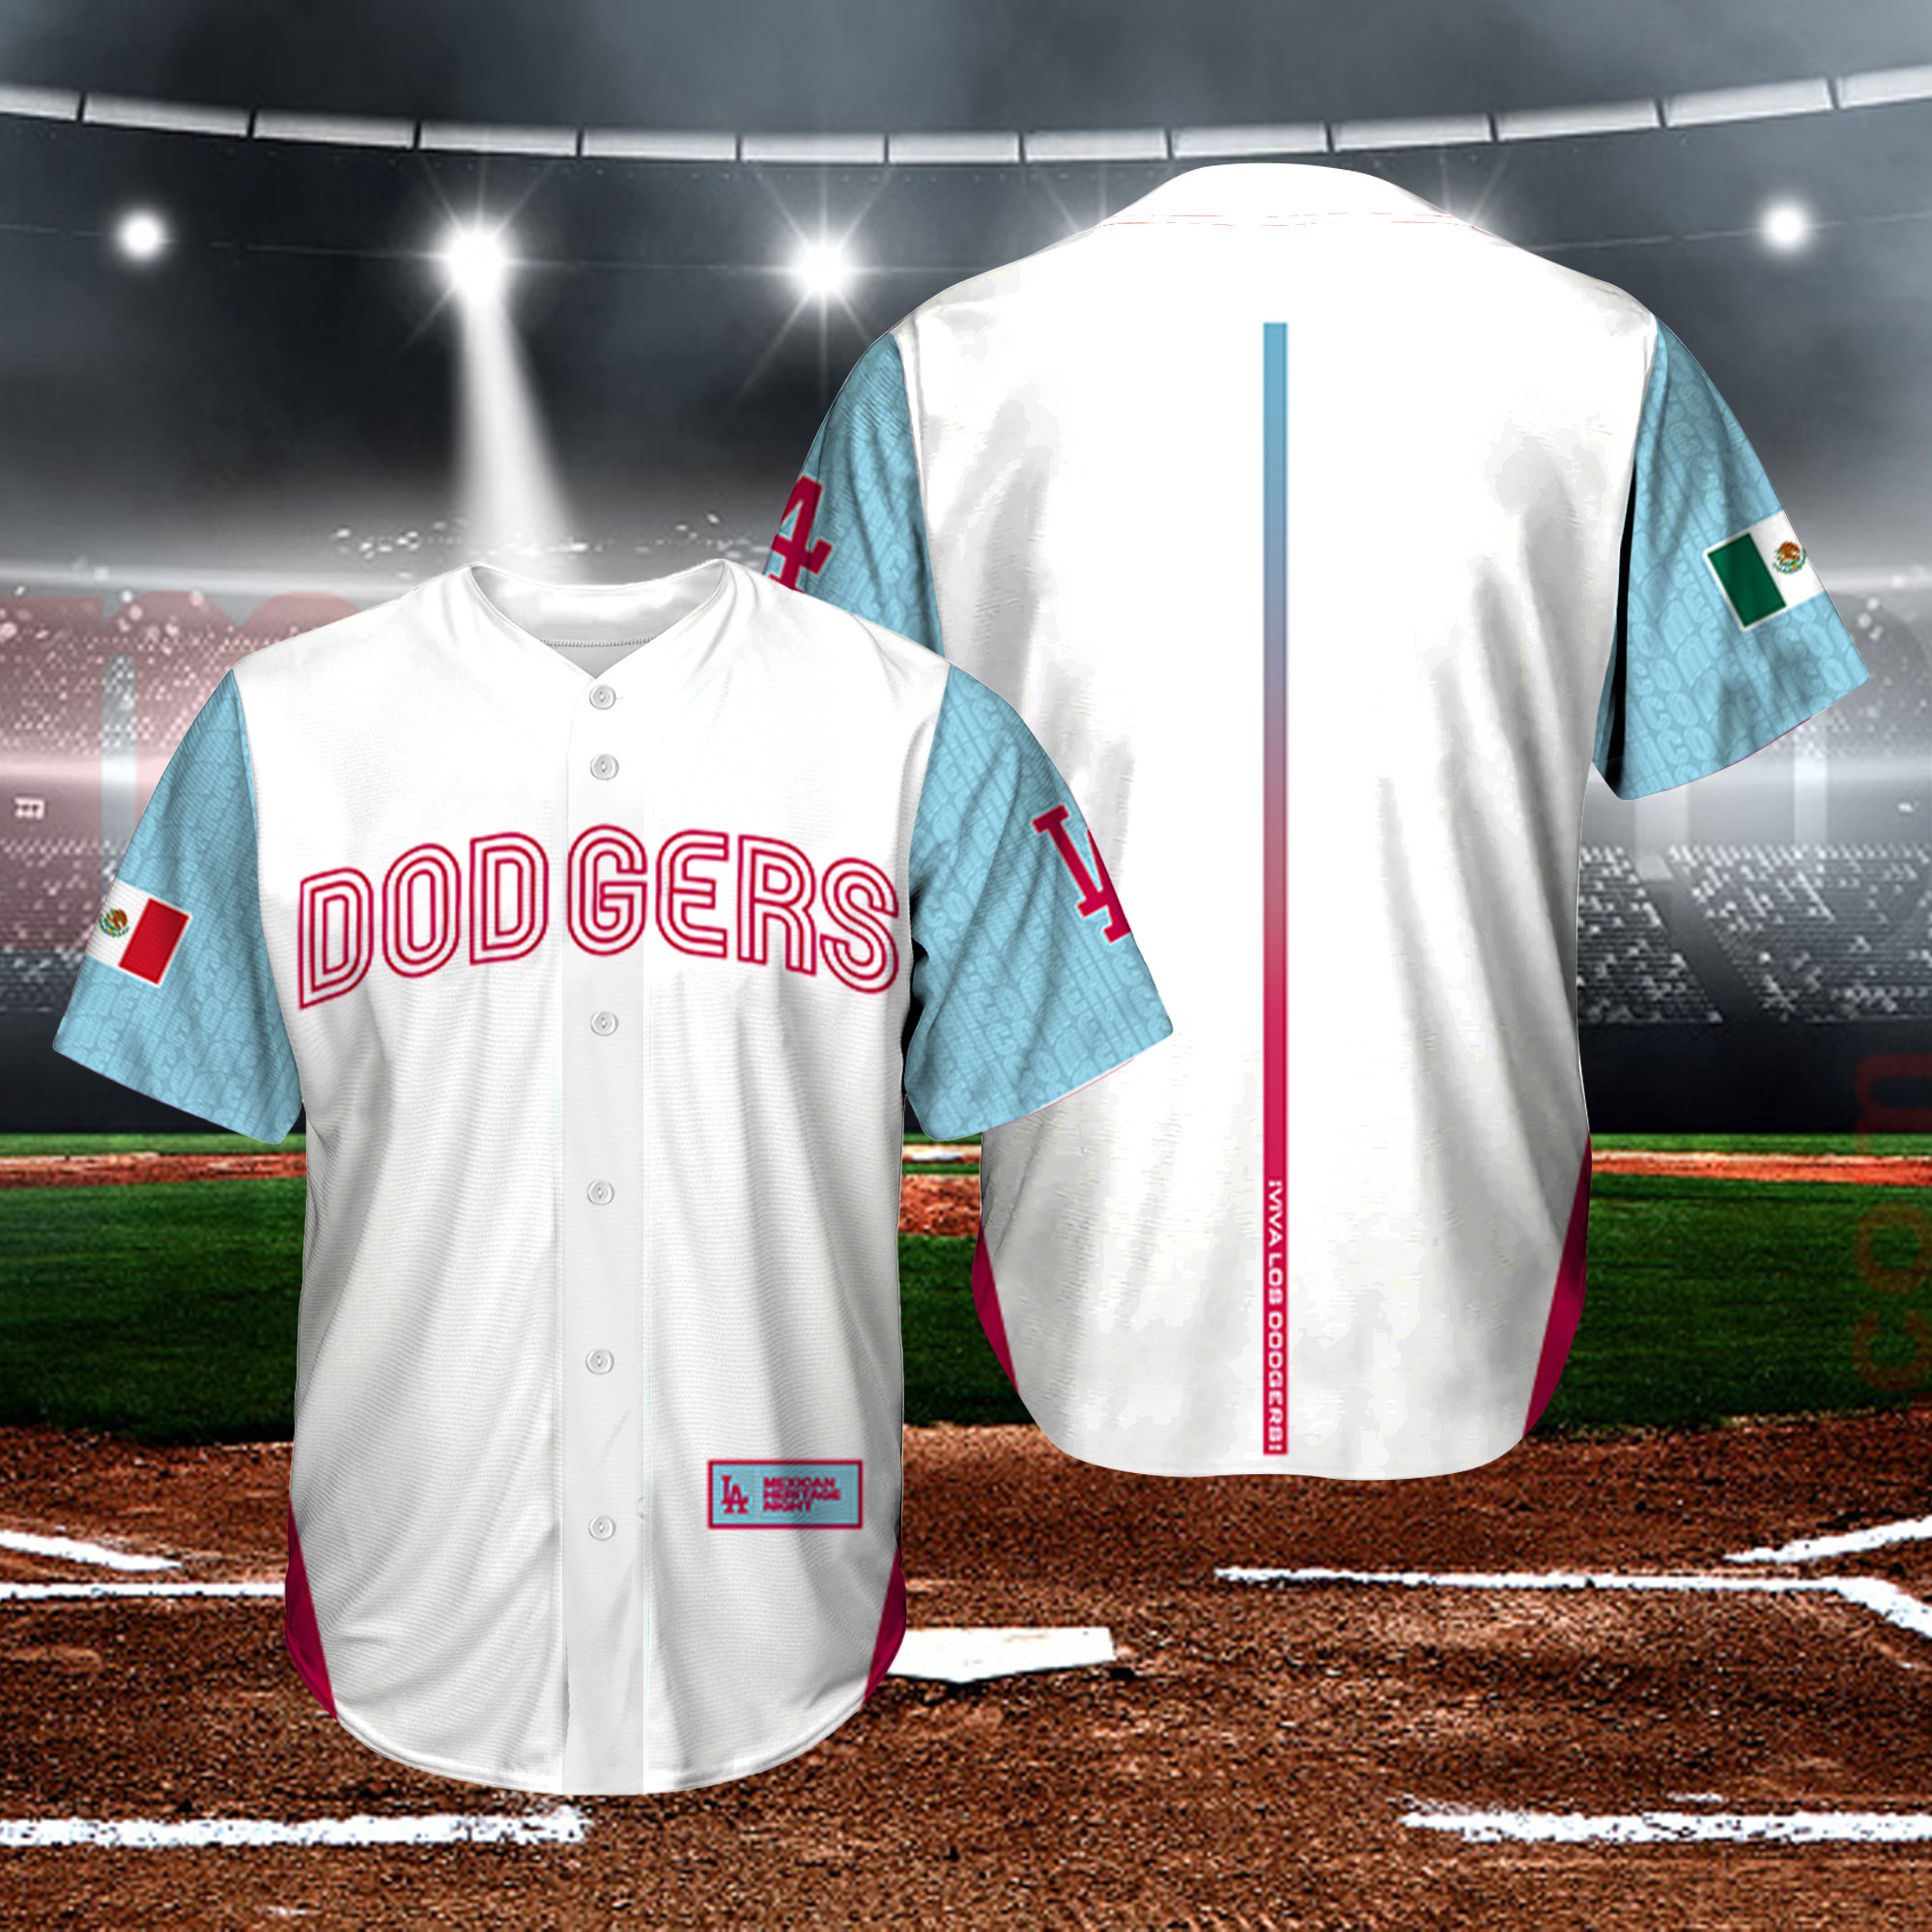 mexican heritage night jersey